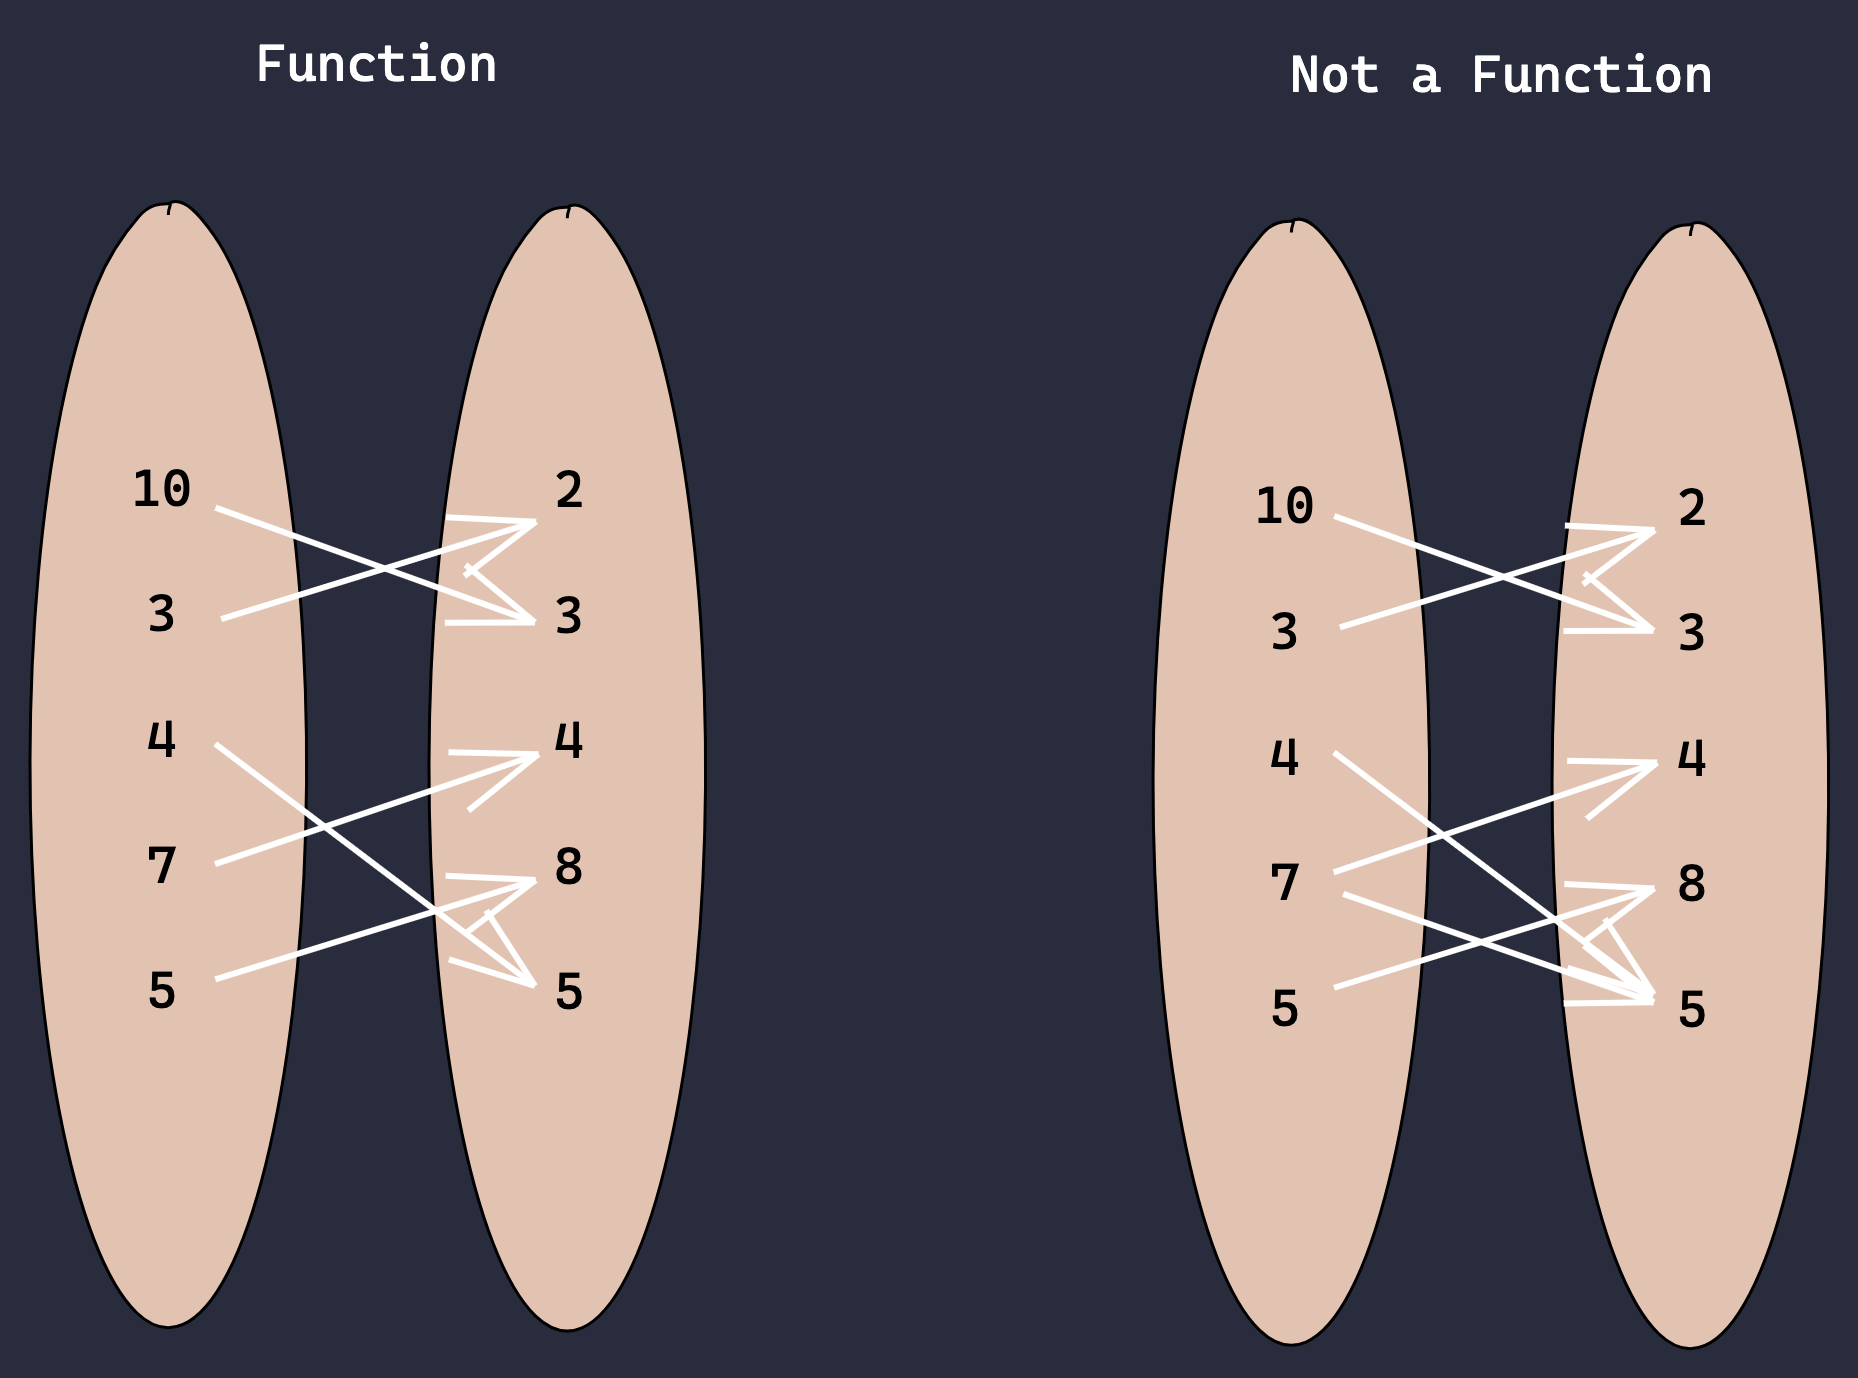 Function vs Not a Function Image